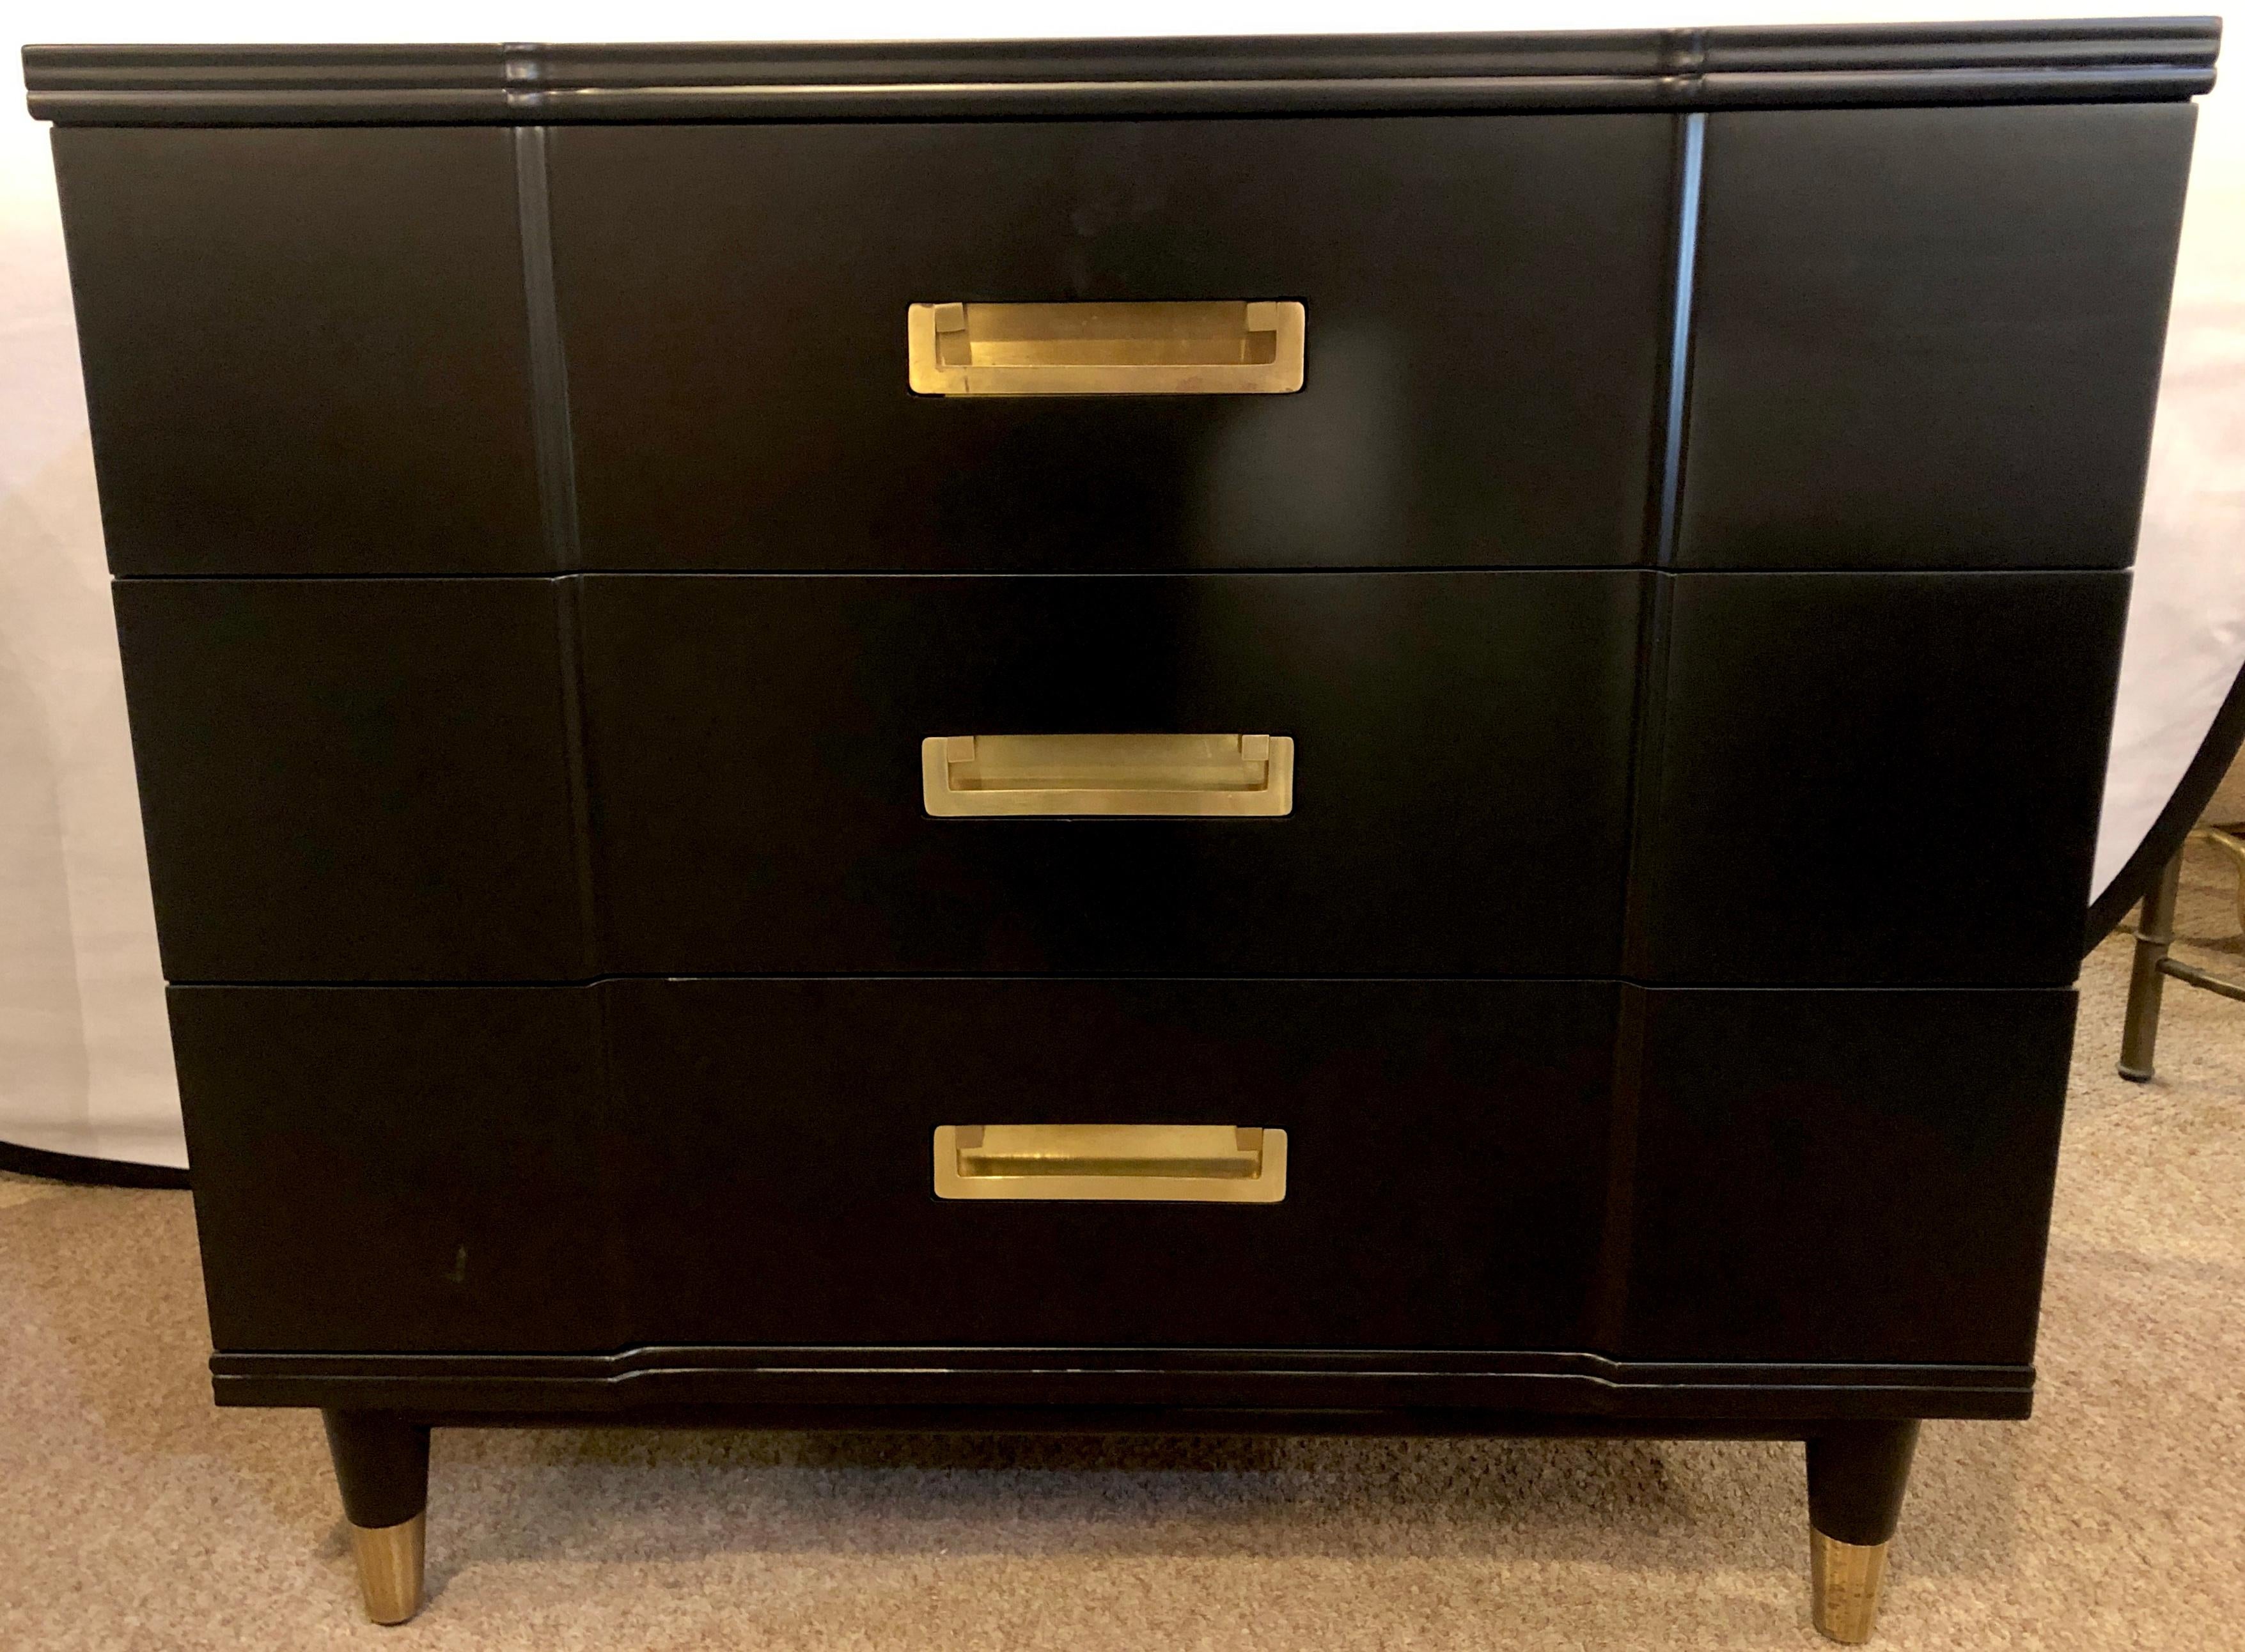 Mid-Century Modern ebony Widdicomb Campaign chests, commodes or night tables with hidden hardware. These sleek and stylish recently refinished chests having bronze hide a way drawer pulls and bronze sabots on an all ebony finish. The pair having